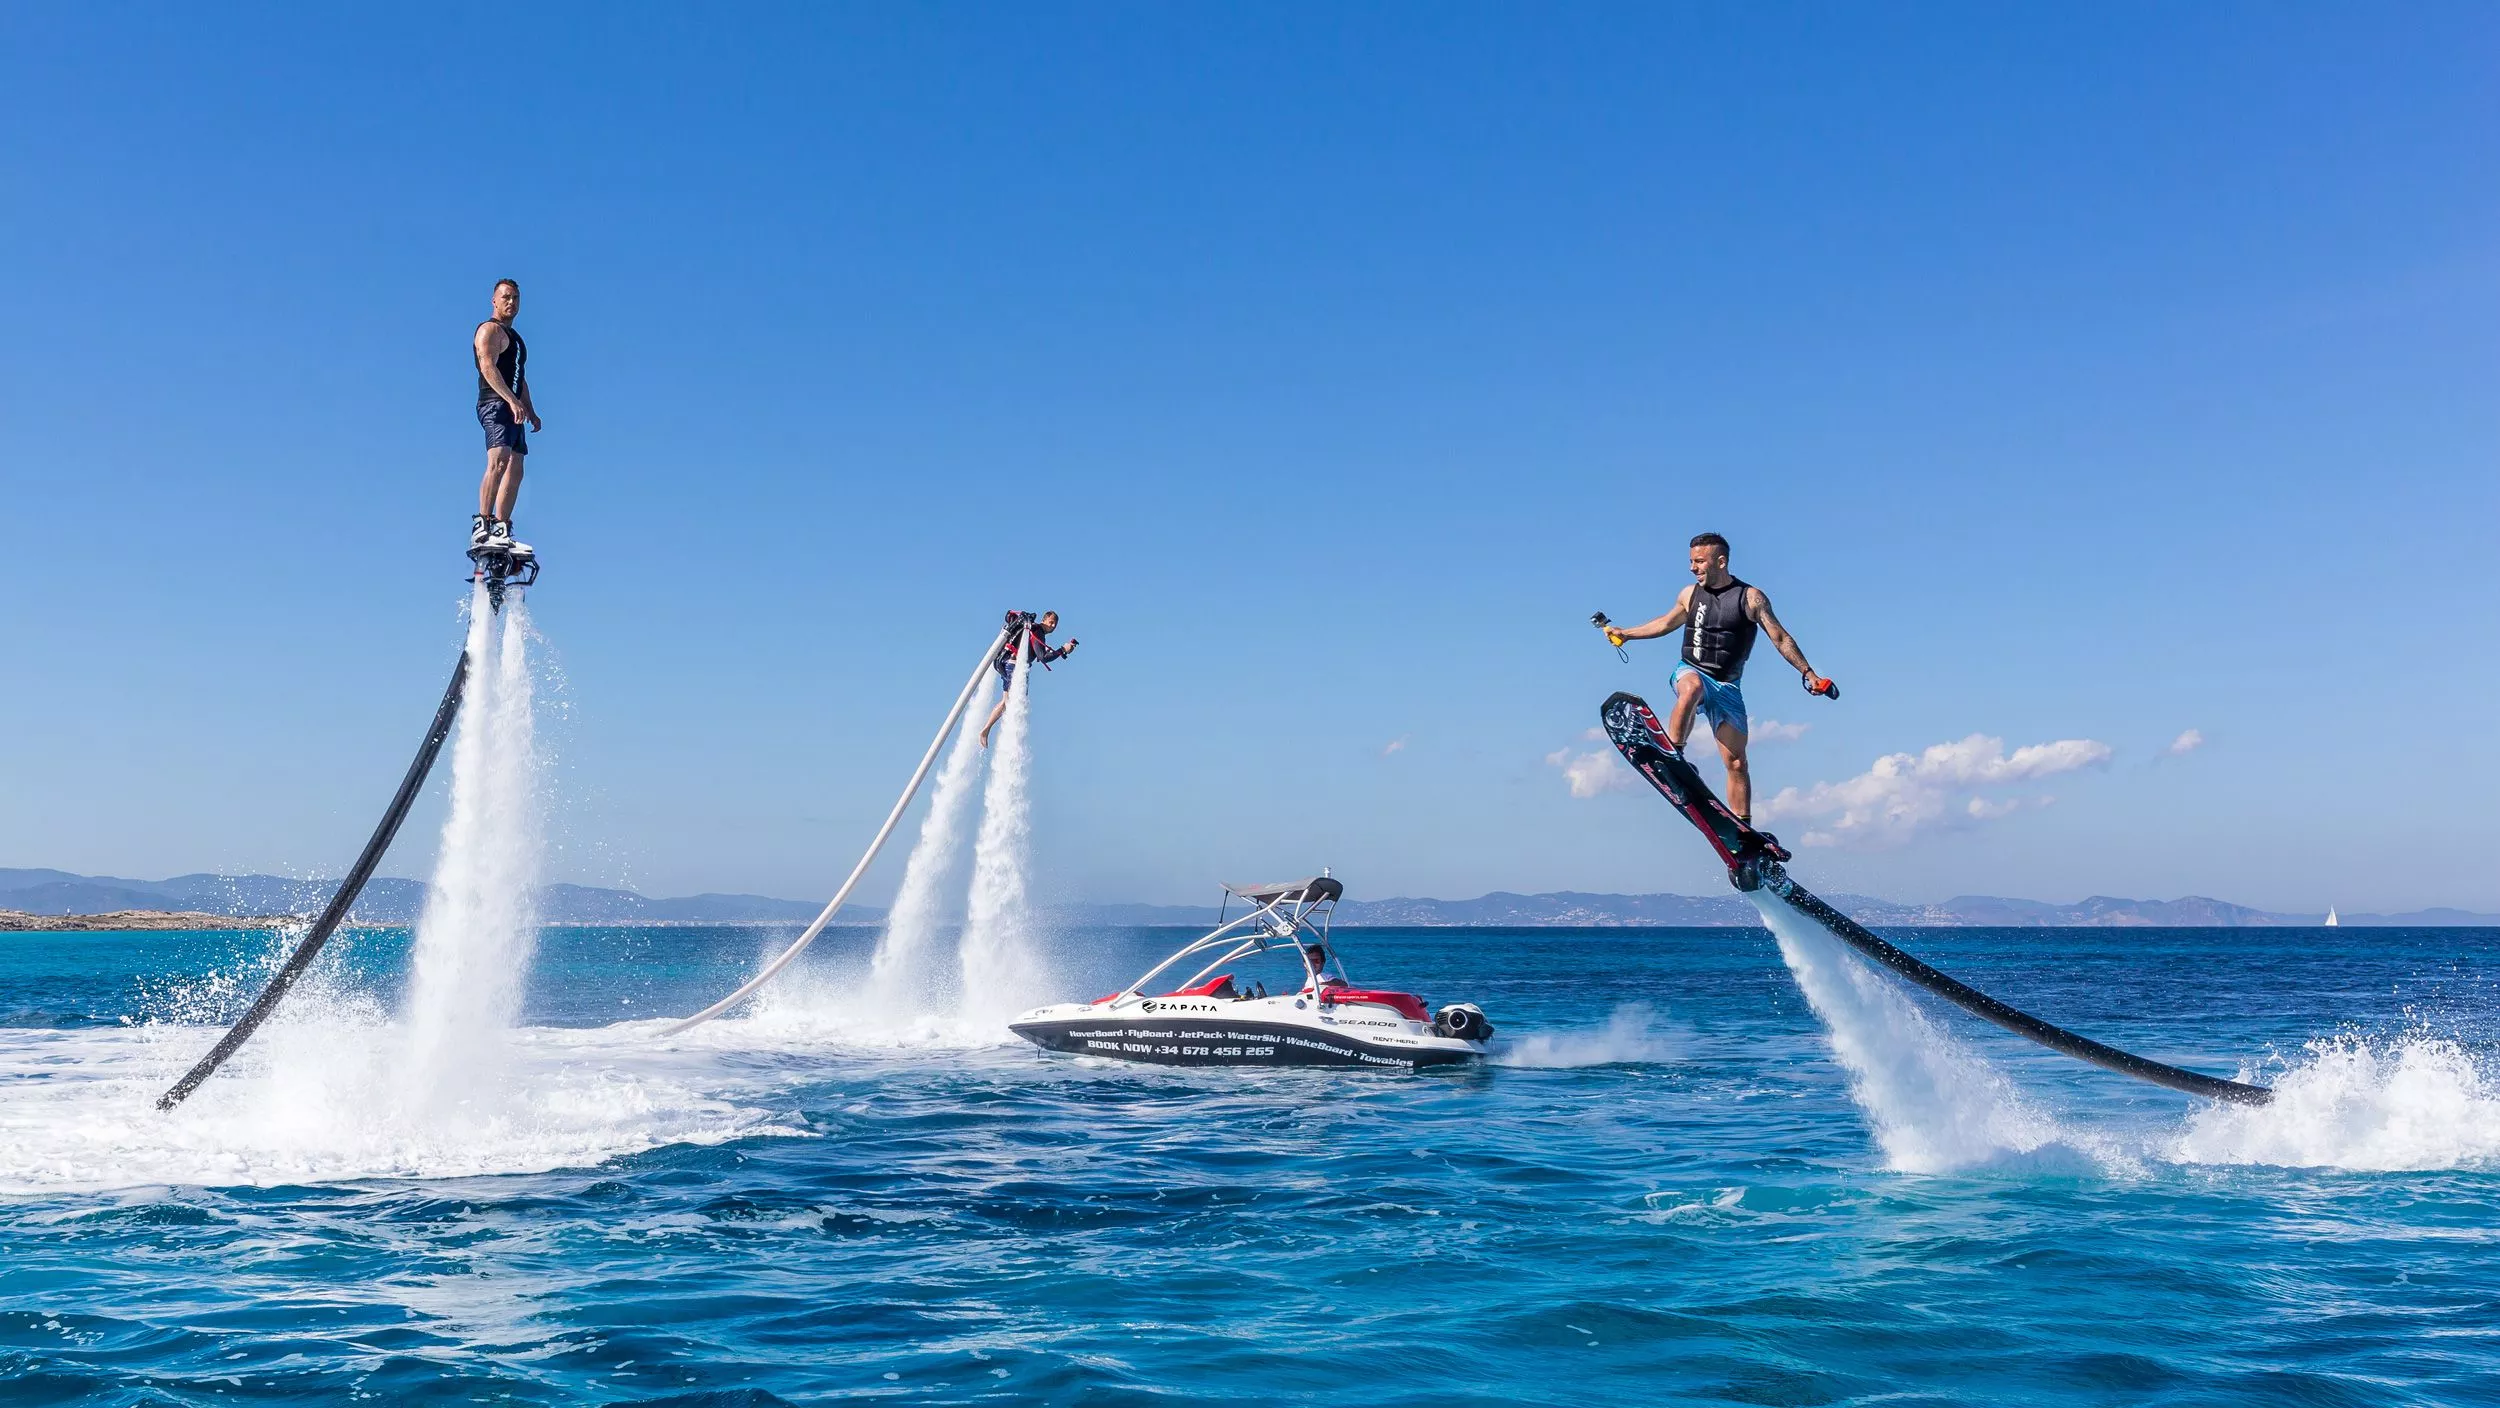 Ride in Dubai Waterports Jetski & Flyboard in United Arab Emirates, Middle East | Water Skiing,Jet Skiing,Flyboarding - Rated 10